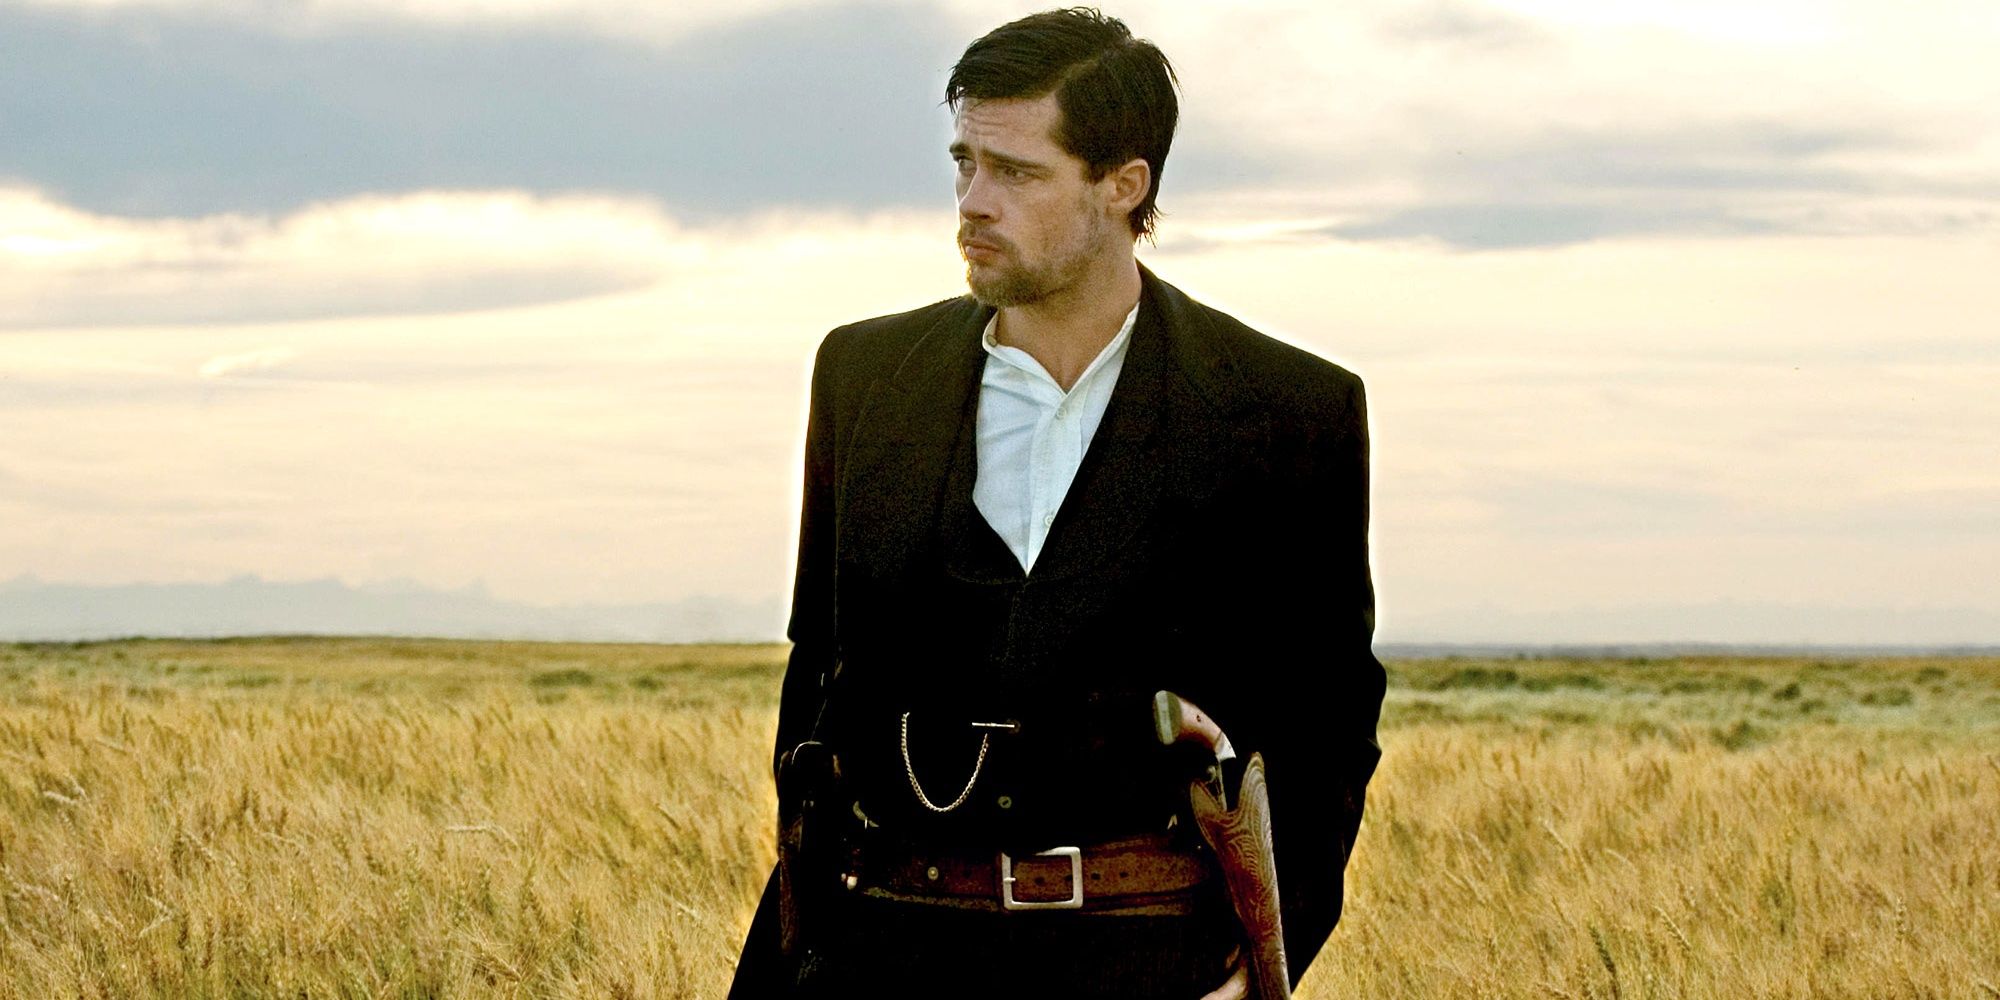 Brad Pitt stands in a field in The Assassination Of Jesse James By The Coward Robert Ford